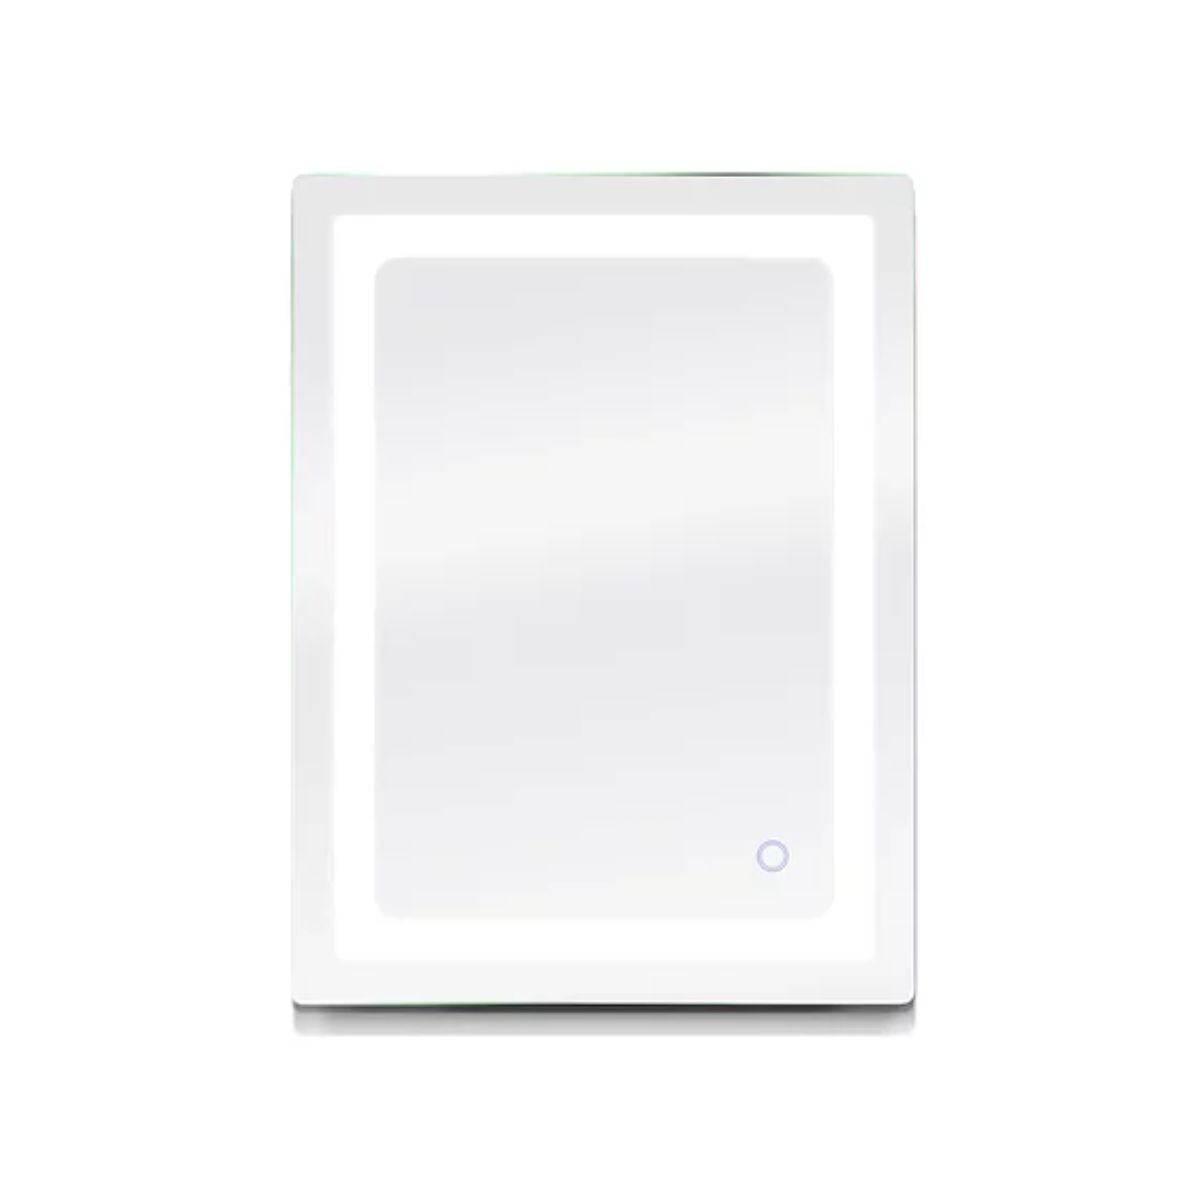 Swan 24 in. x 34 in. LED Wall Mirror with Touch On/Off Dimmer Function